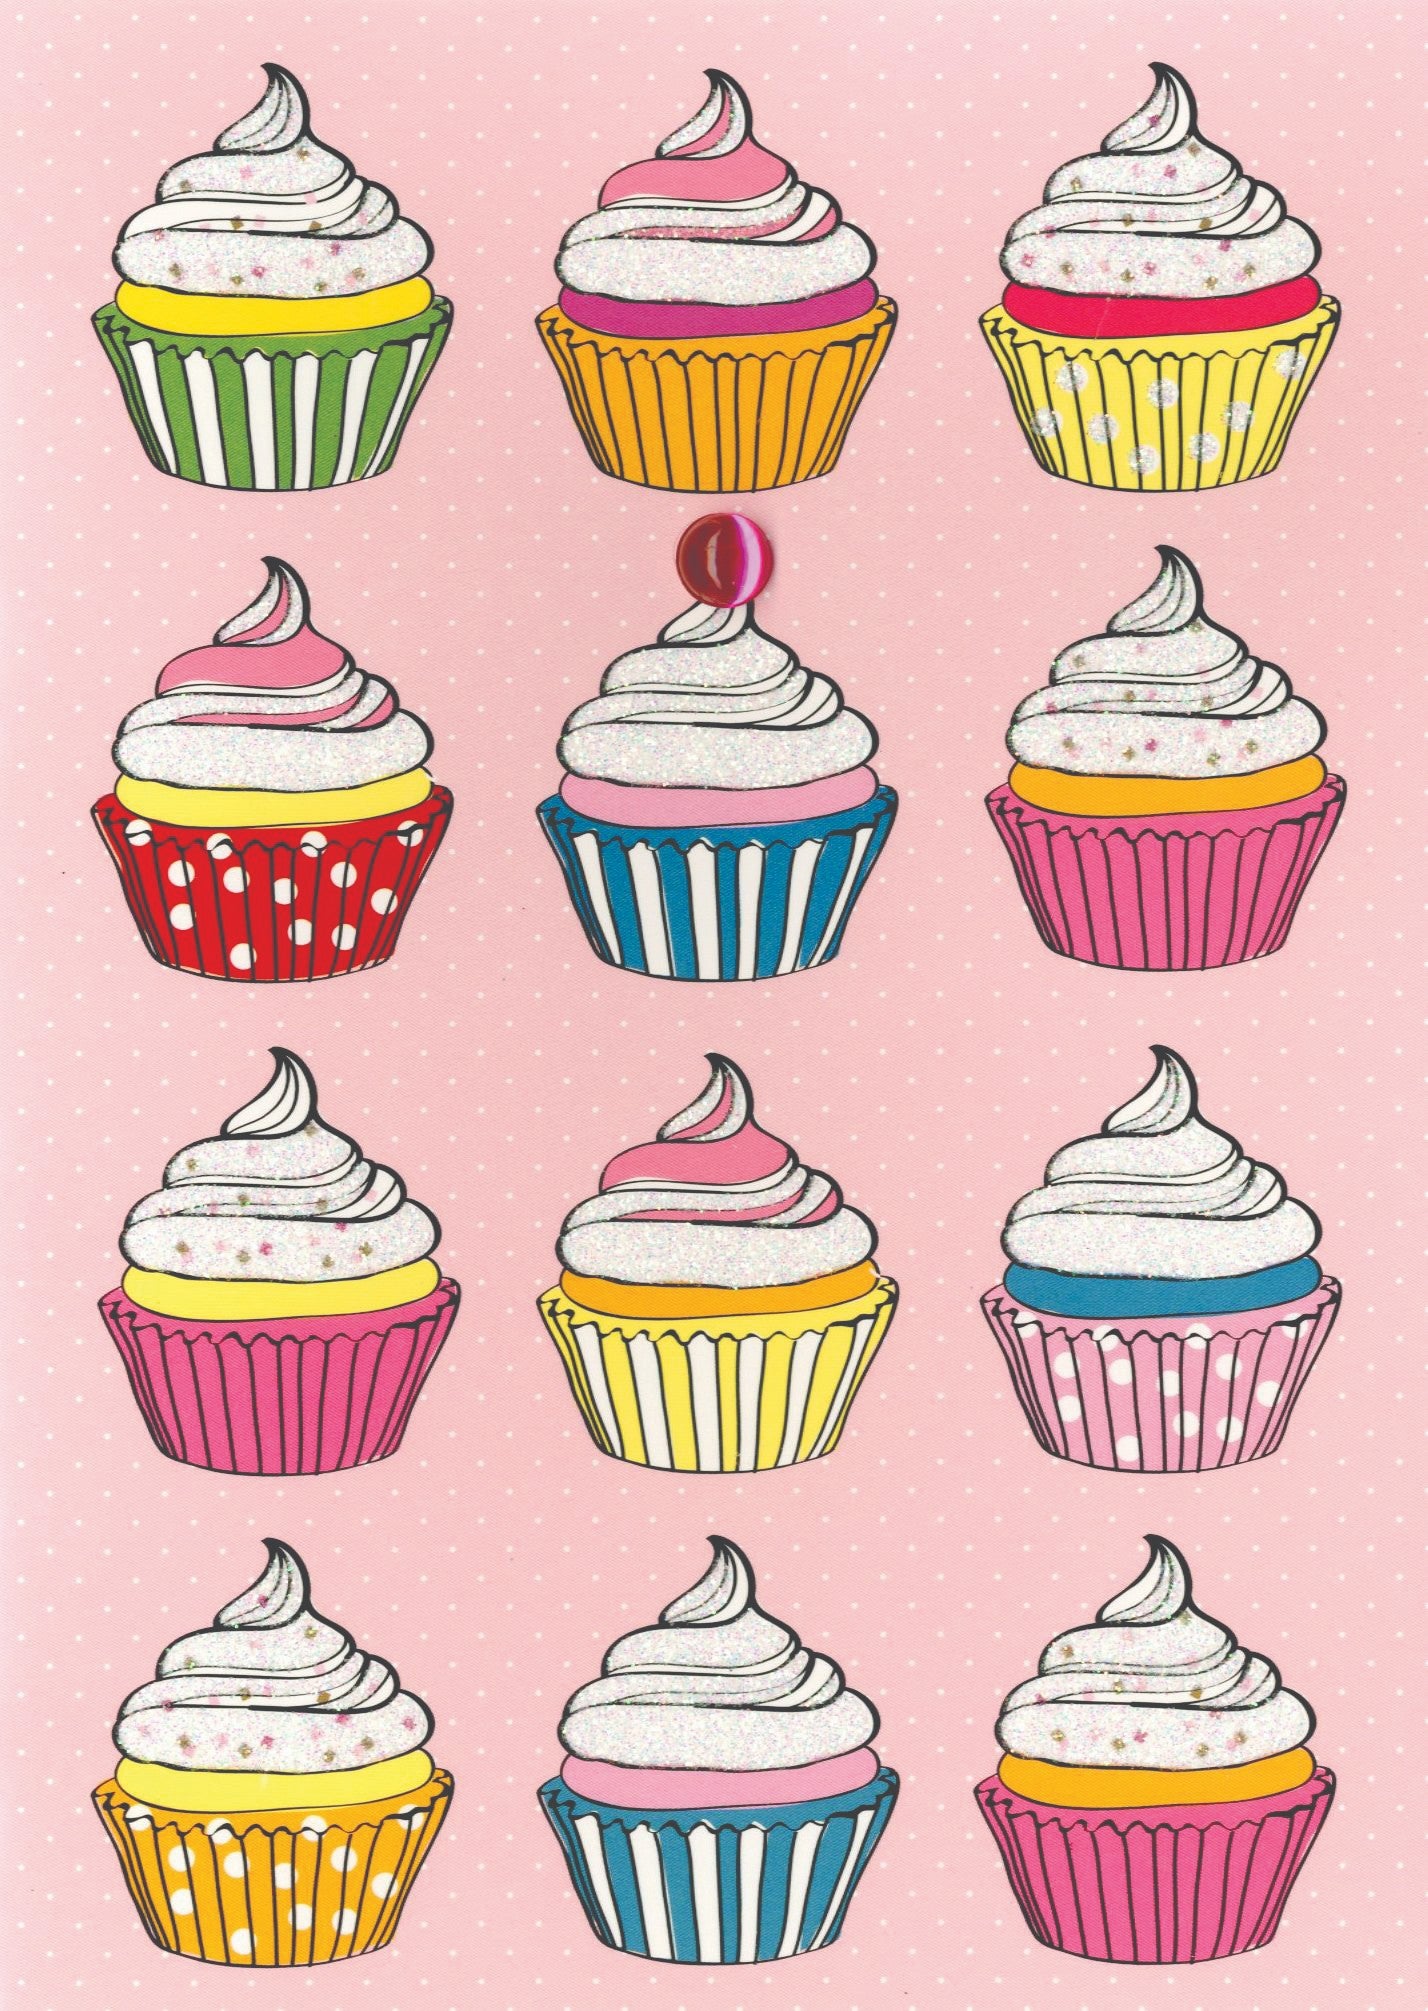 Yummy Cupcakes Any Occasion Greeting Card